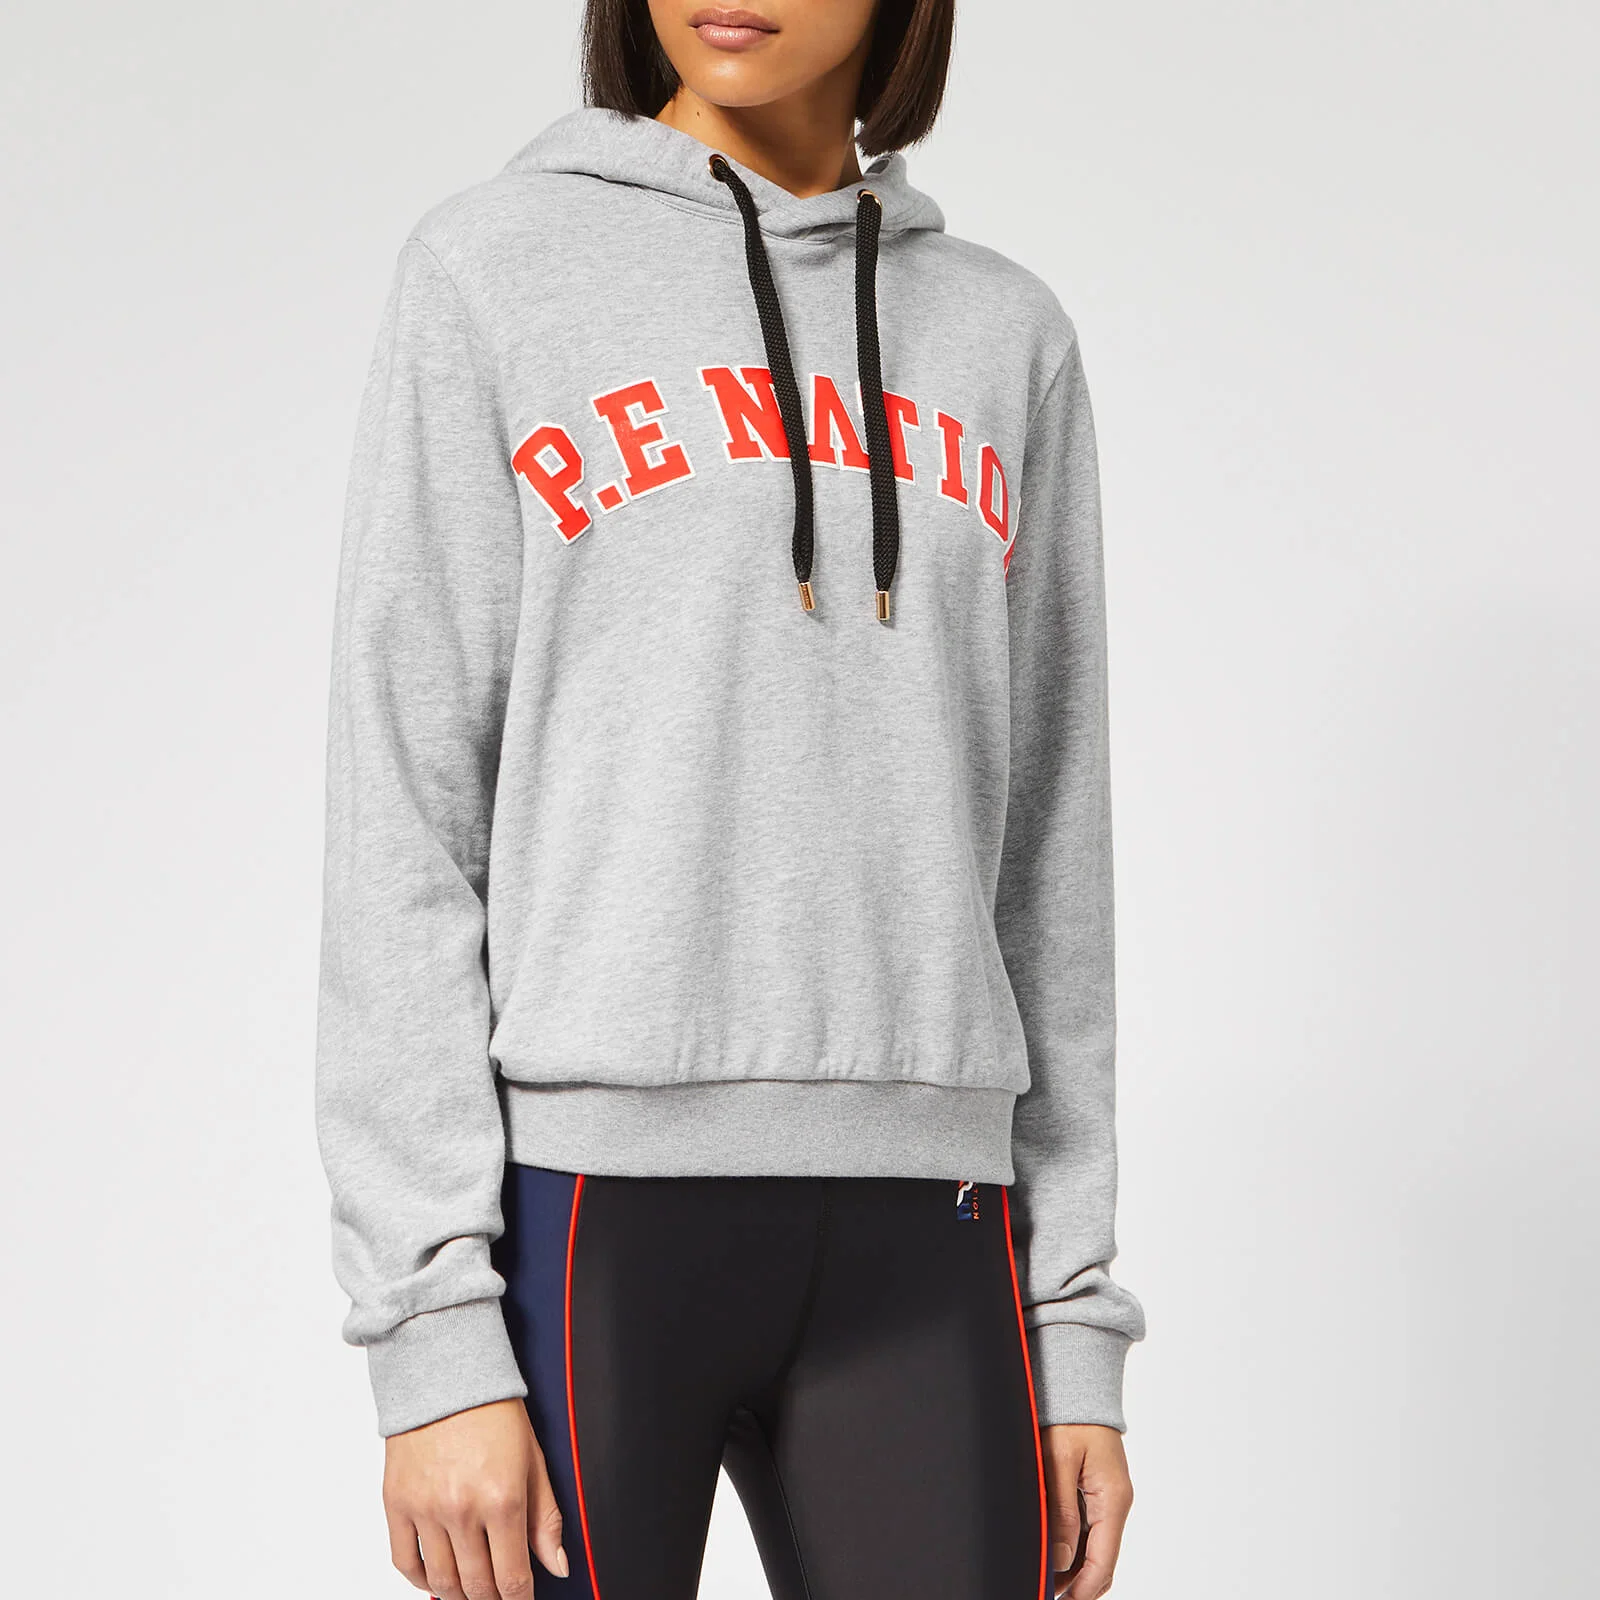 P.E Nation Women's Squad Hoodie - Grey Marl Image 1